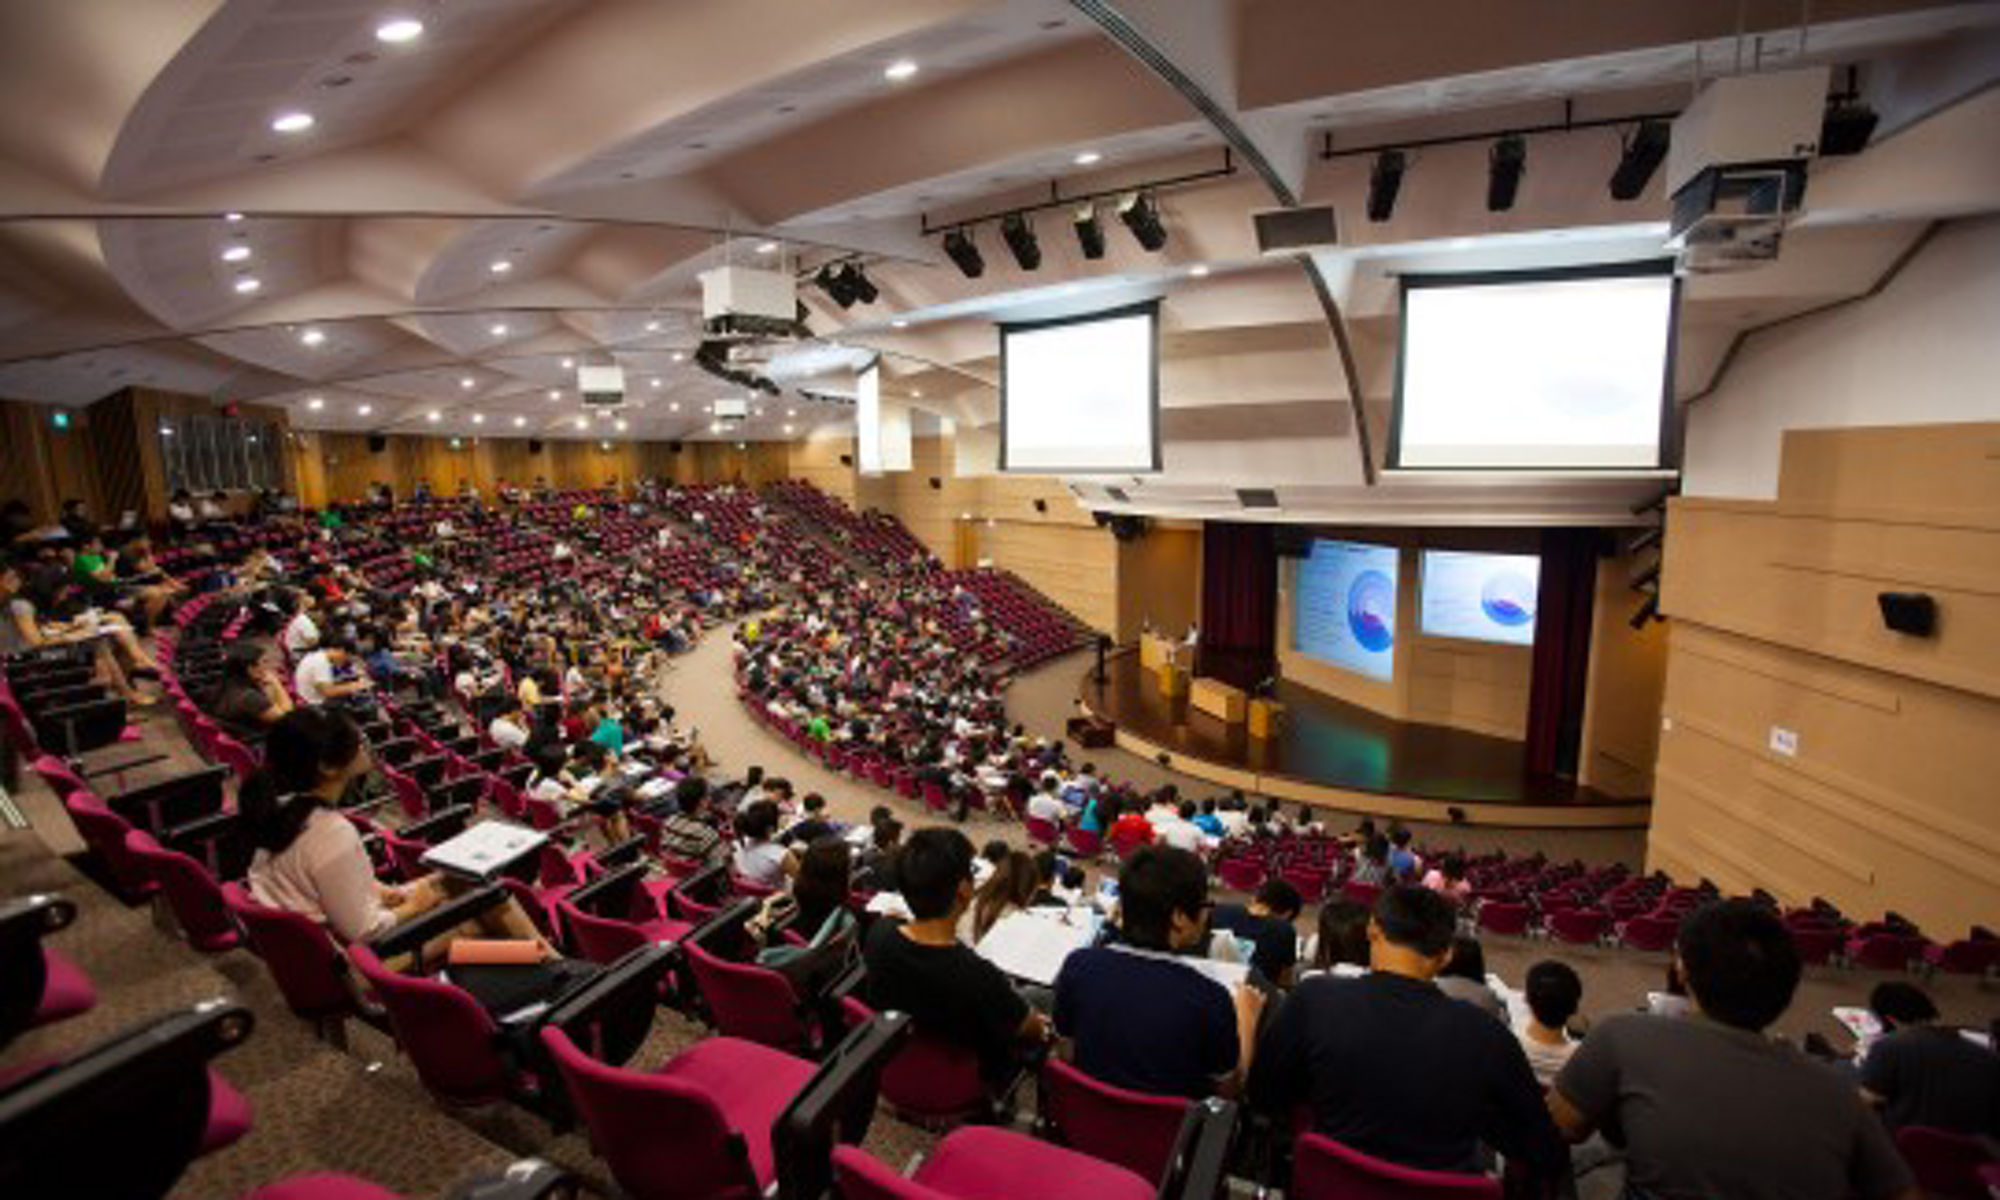 classroom auditorium full of students listening to a lecture